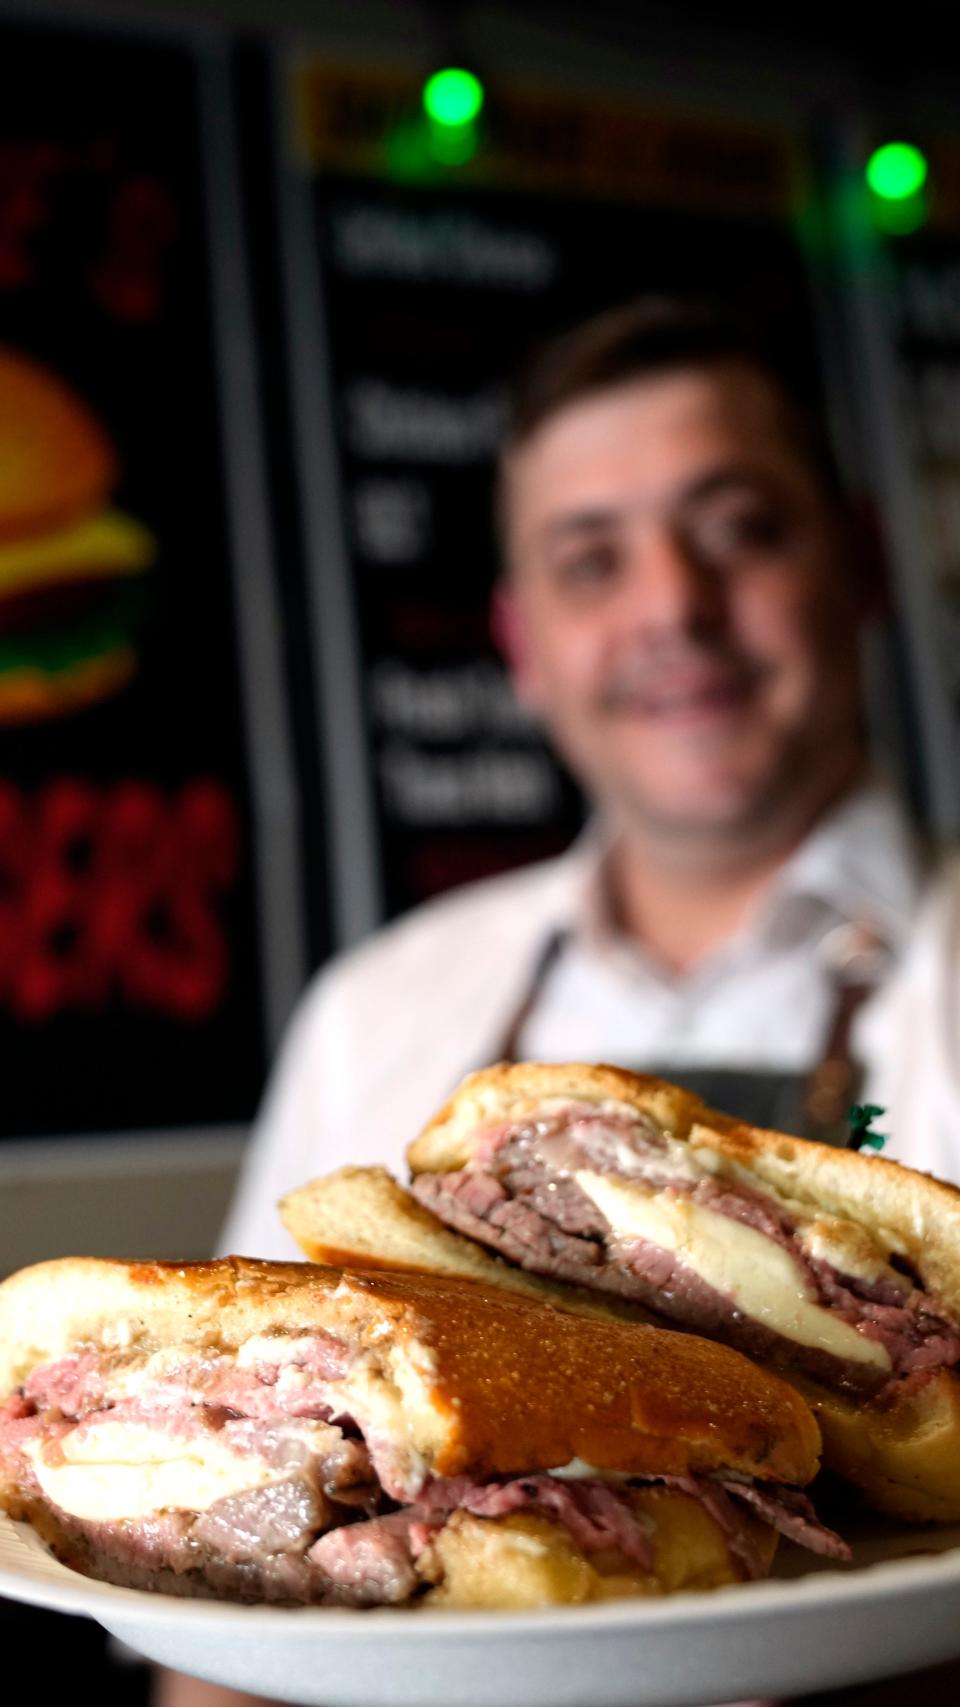 Stephen Chrisomalis, of Steve's Burgers, poses with his new roast beef sandwich, which he is calling the North Jersey Eats Hungry Reporter.